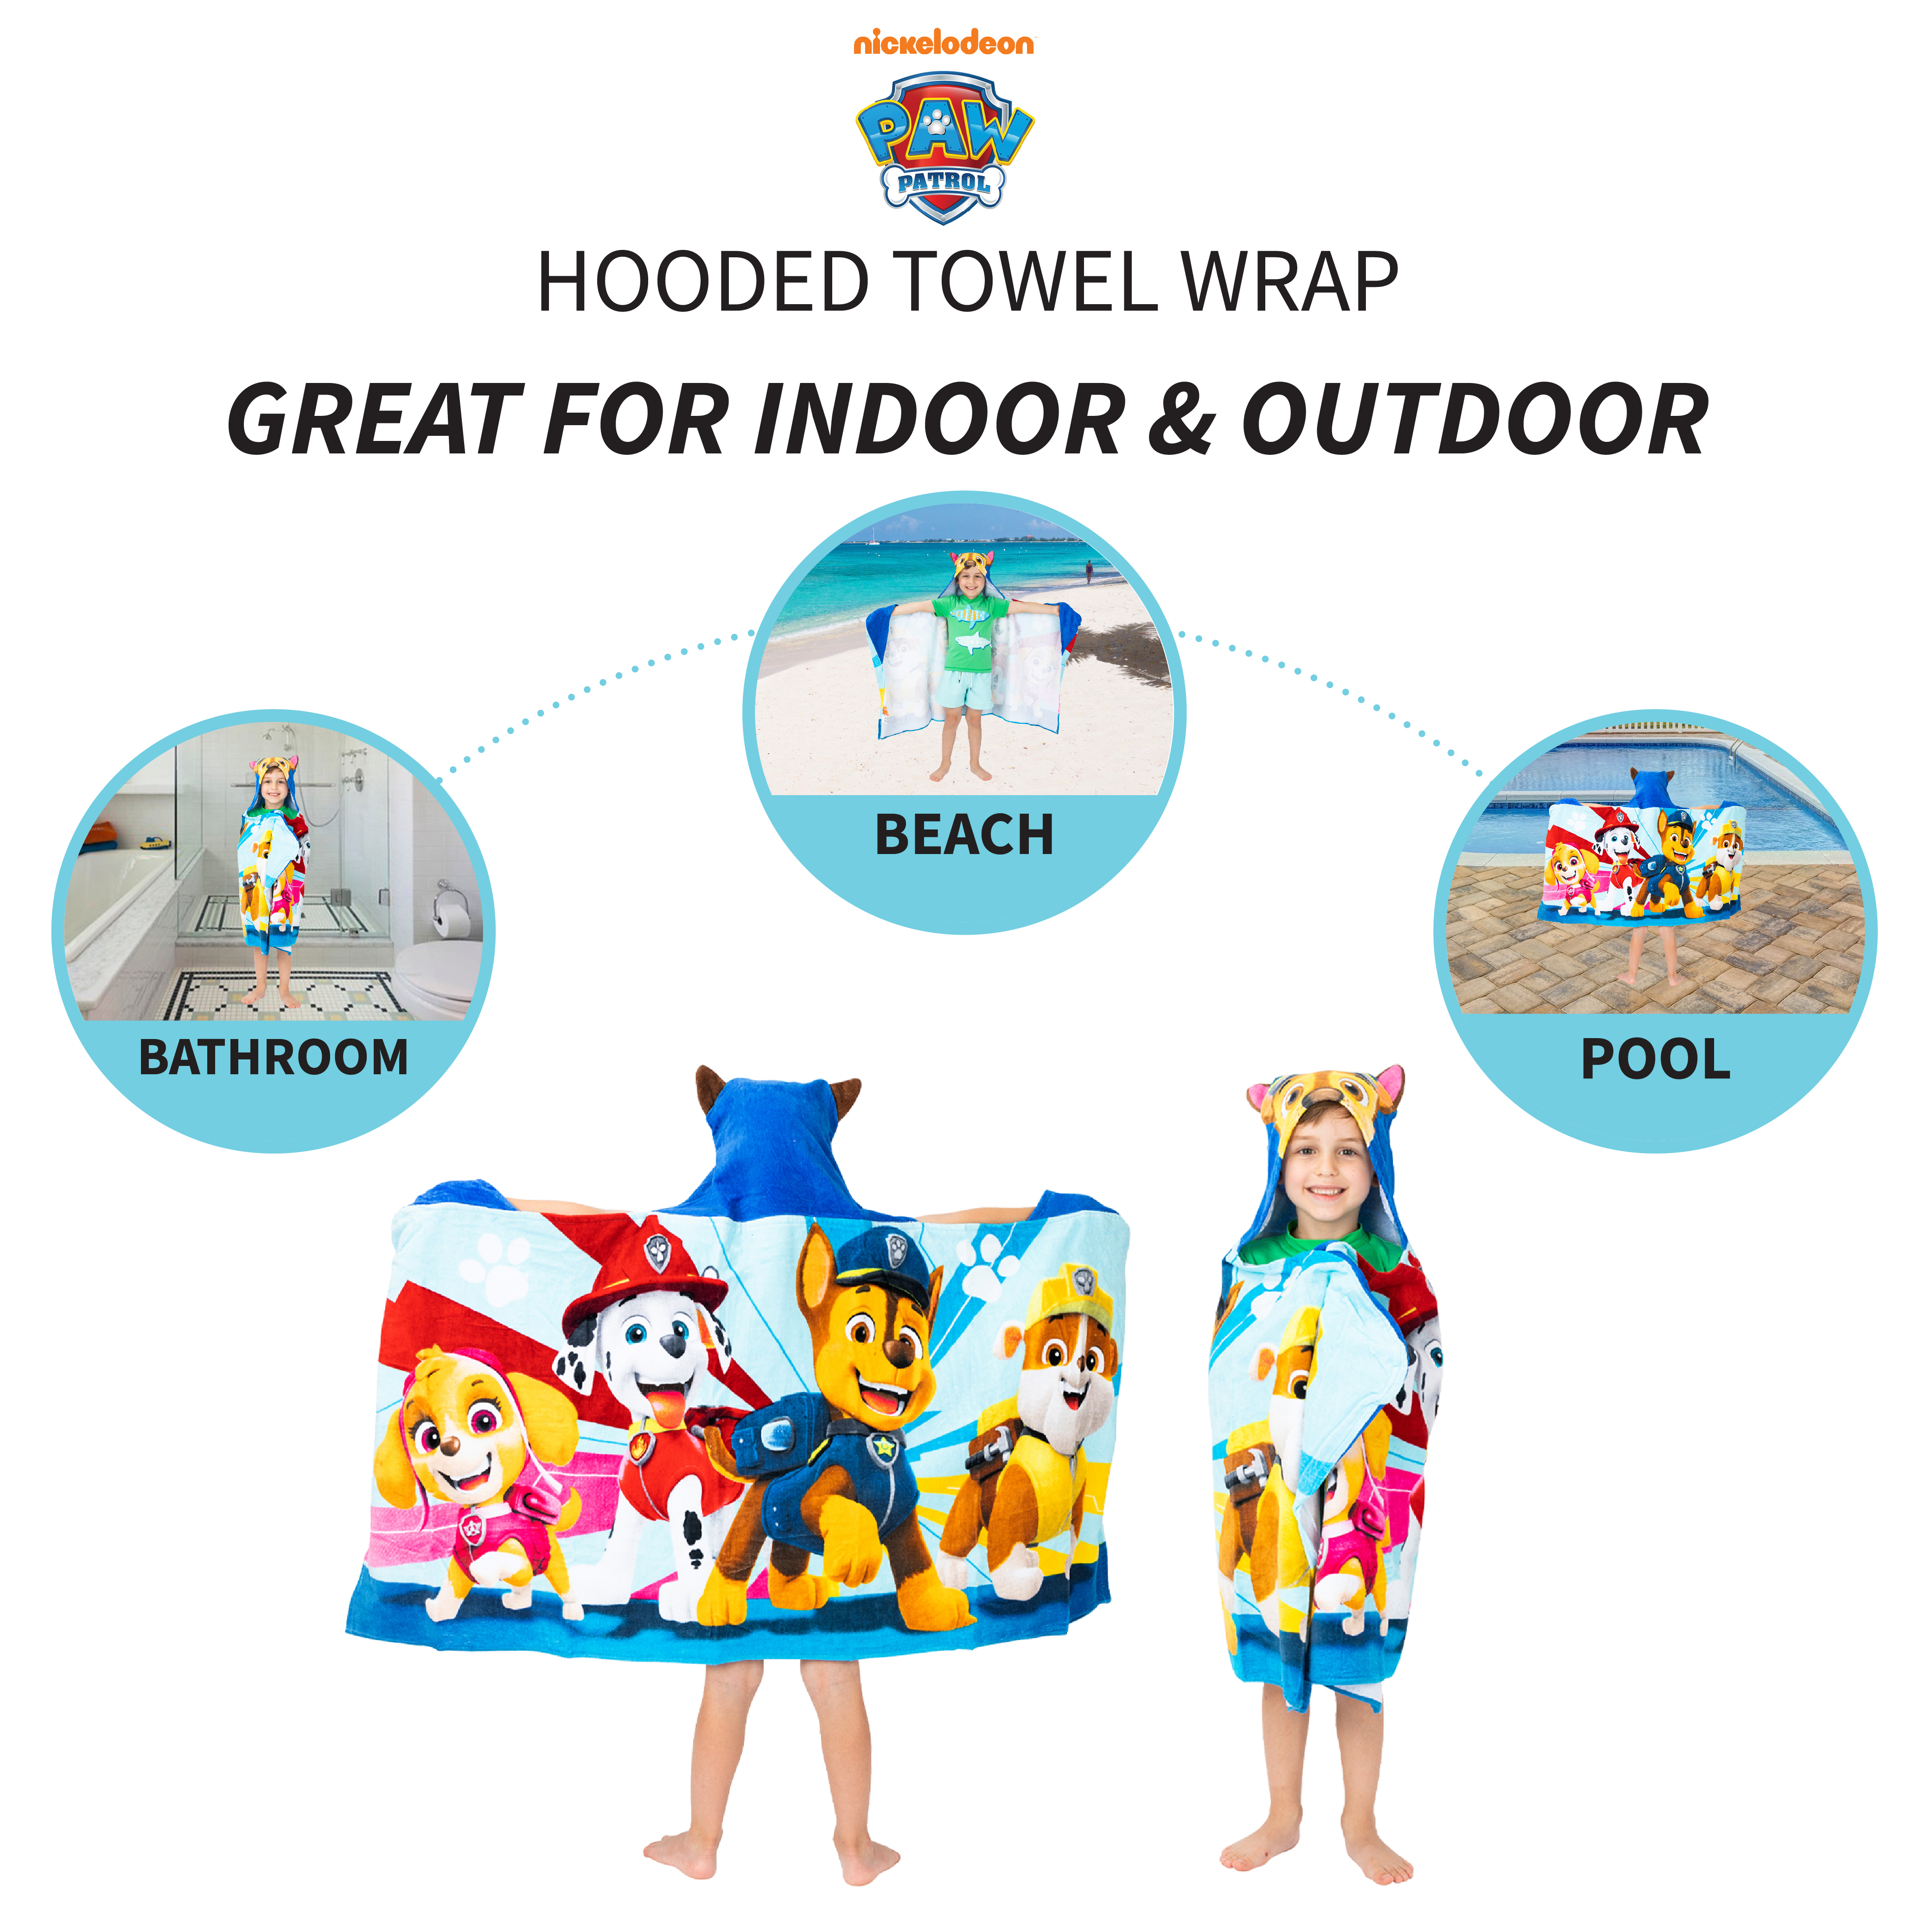 PAW Patrol Chase Kids Cotton Hooded Towel - image 5 of 6